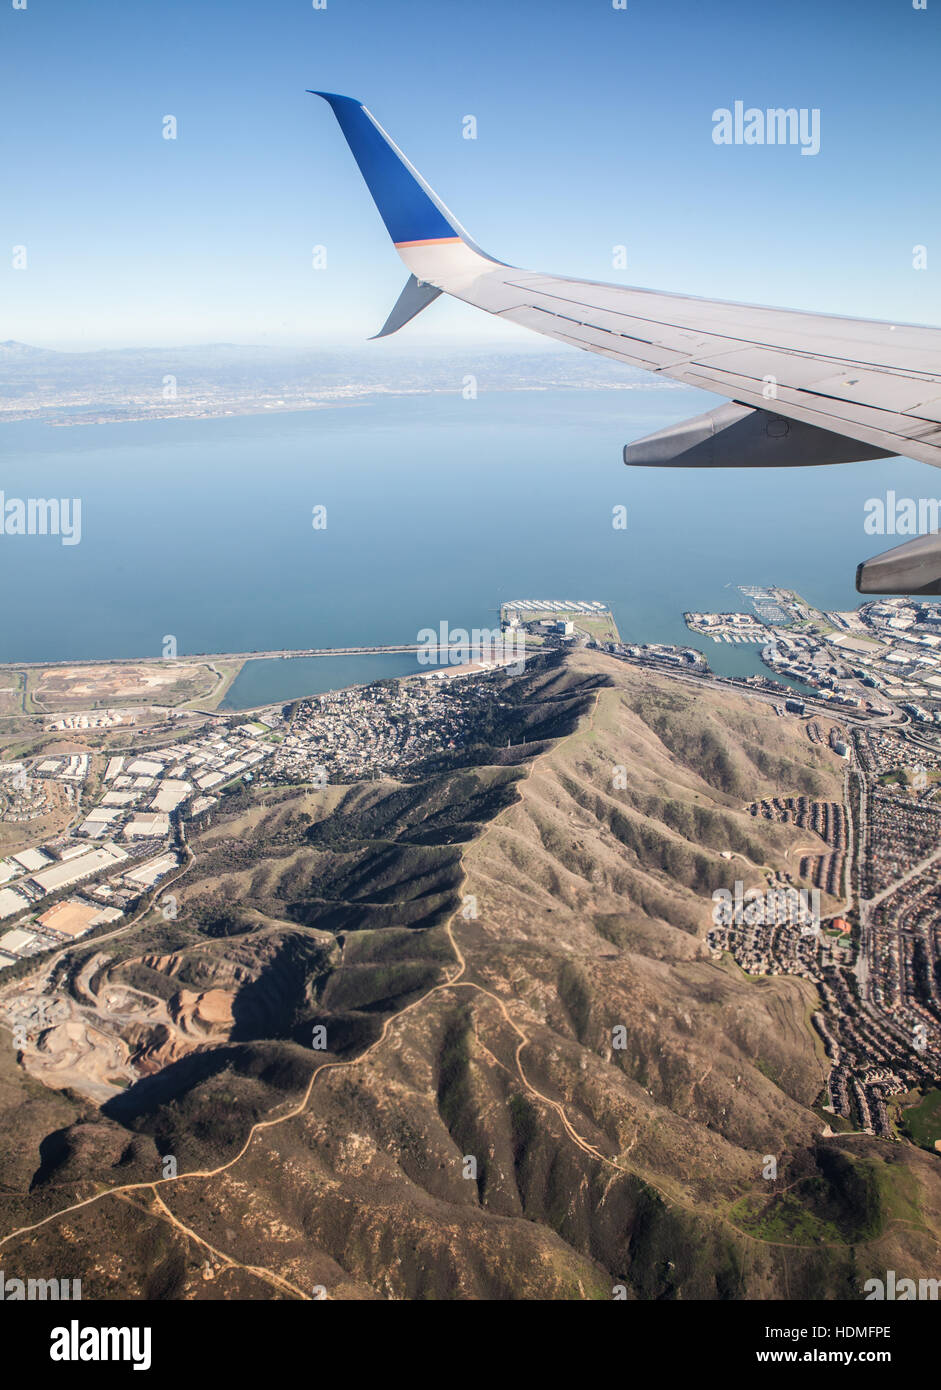 San Francisco Bay Area from a plane Stock Photo